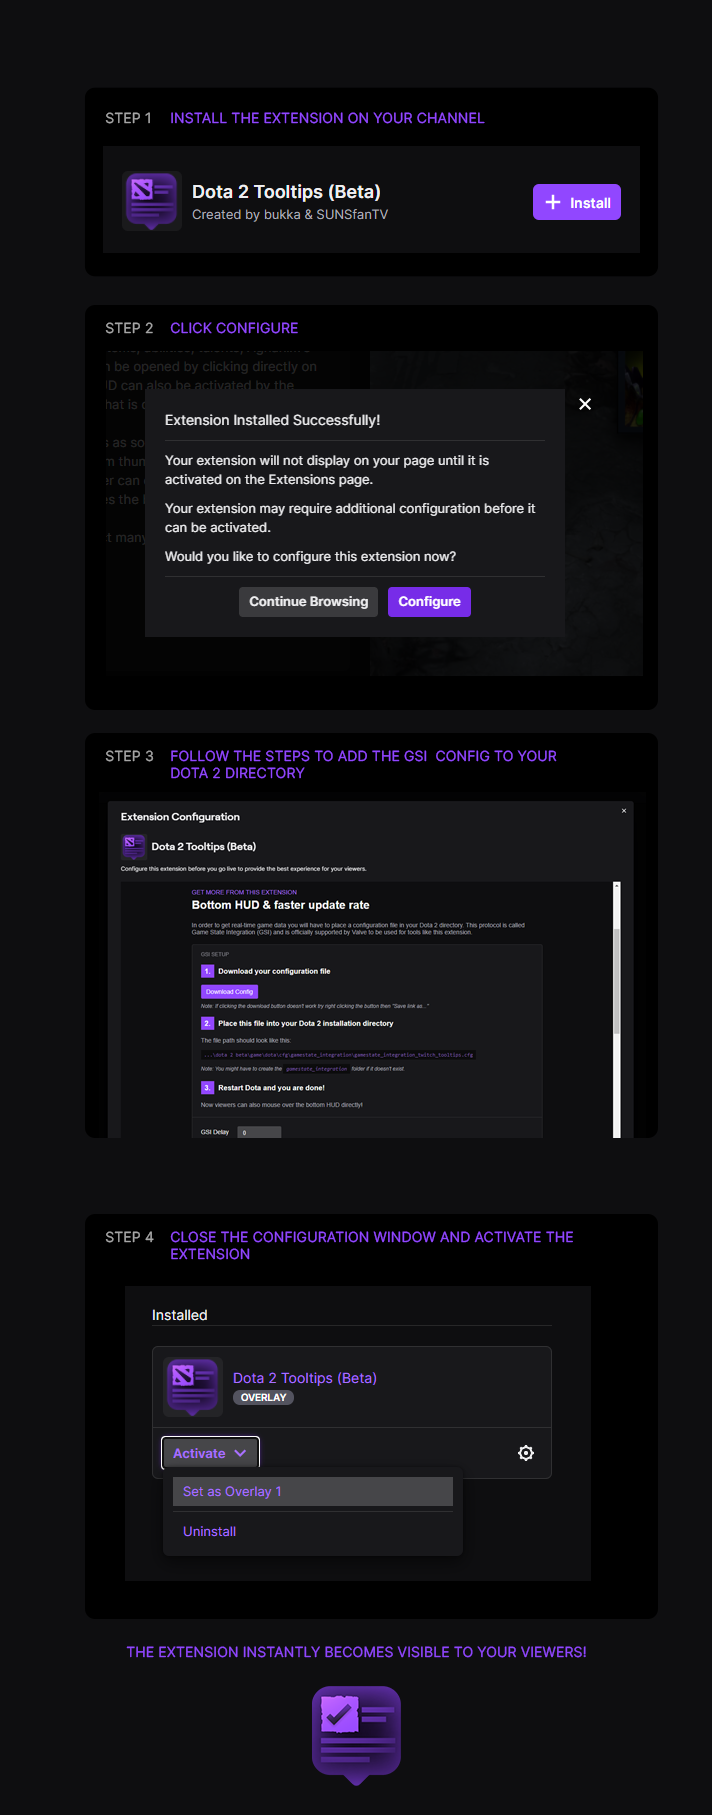 Dota 2 Tooltips Twitch Extension